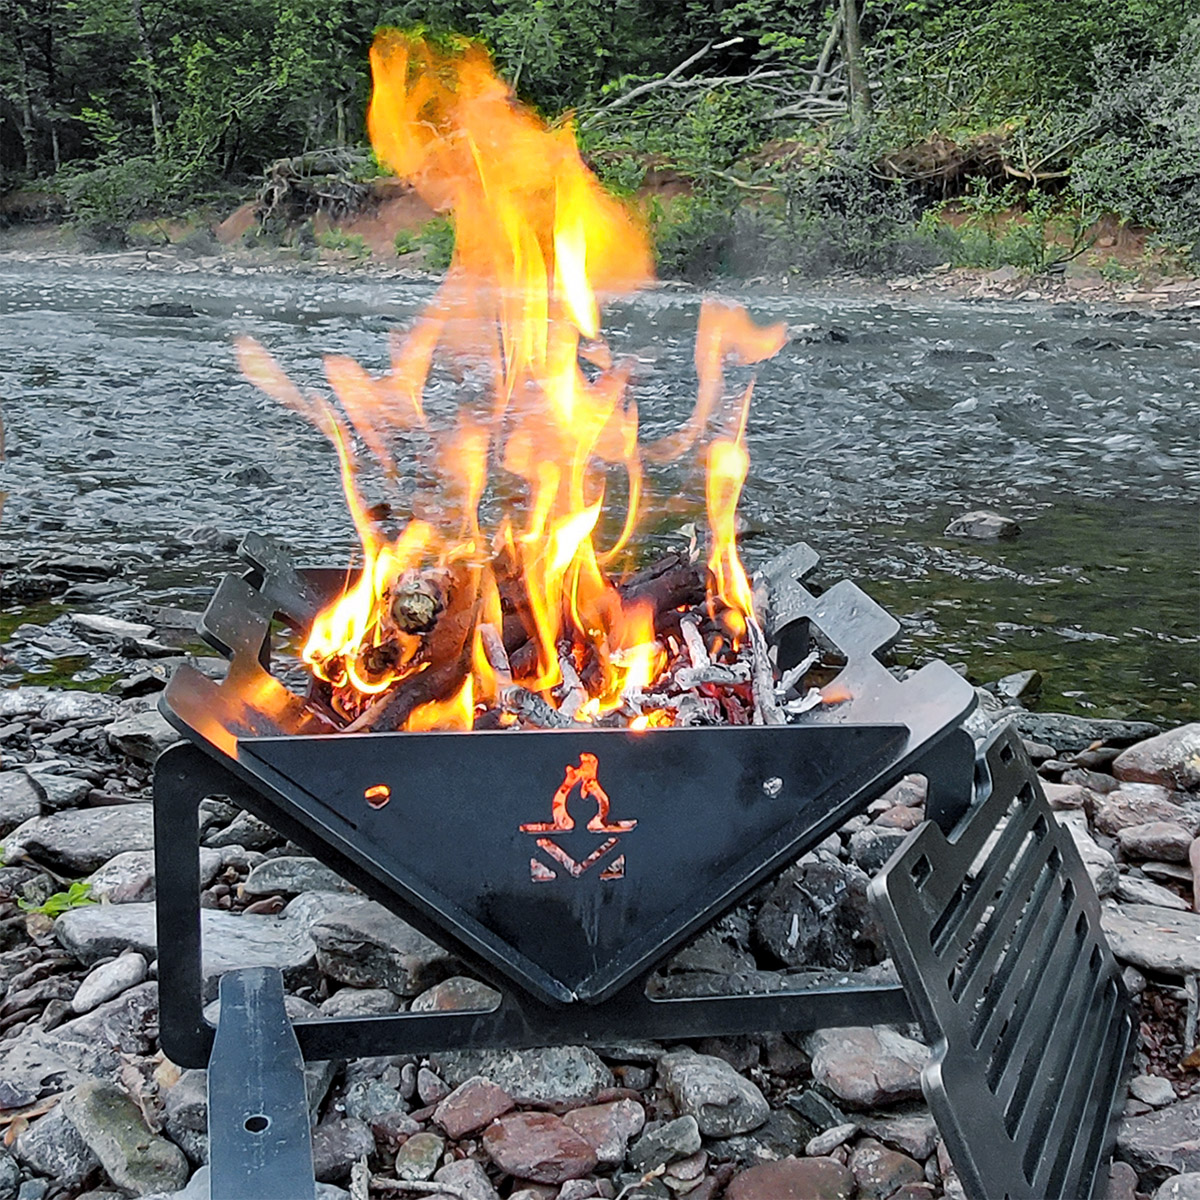 https://grillderness.com/wp-content/uploads/2020/10/product-small-gr-river.jpg